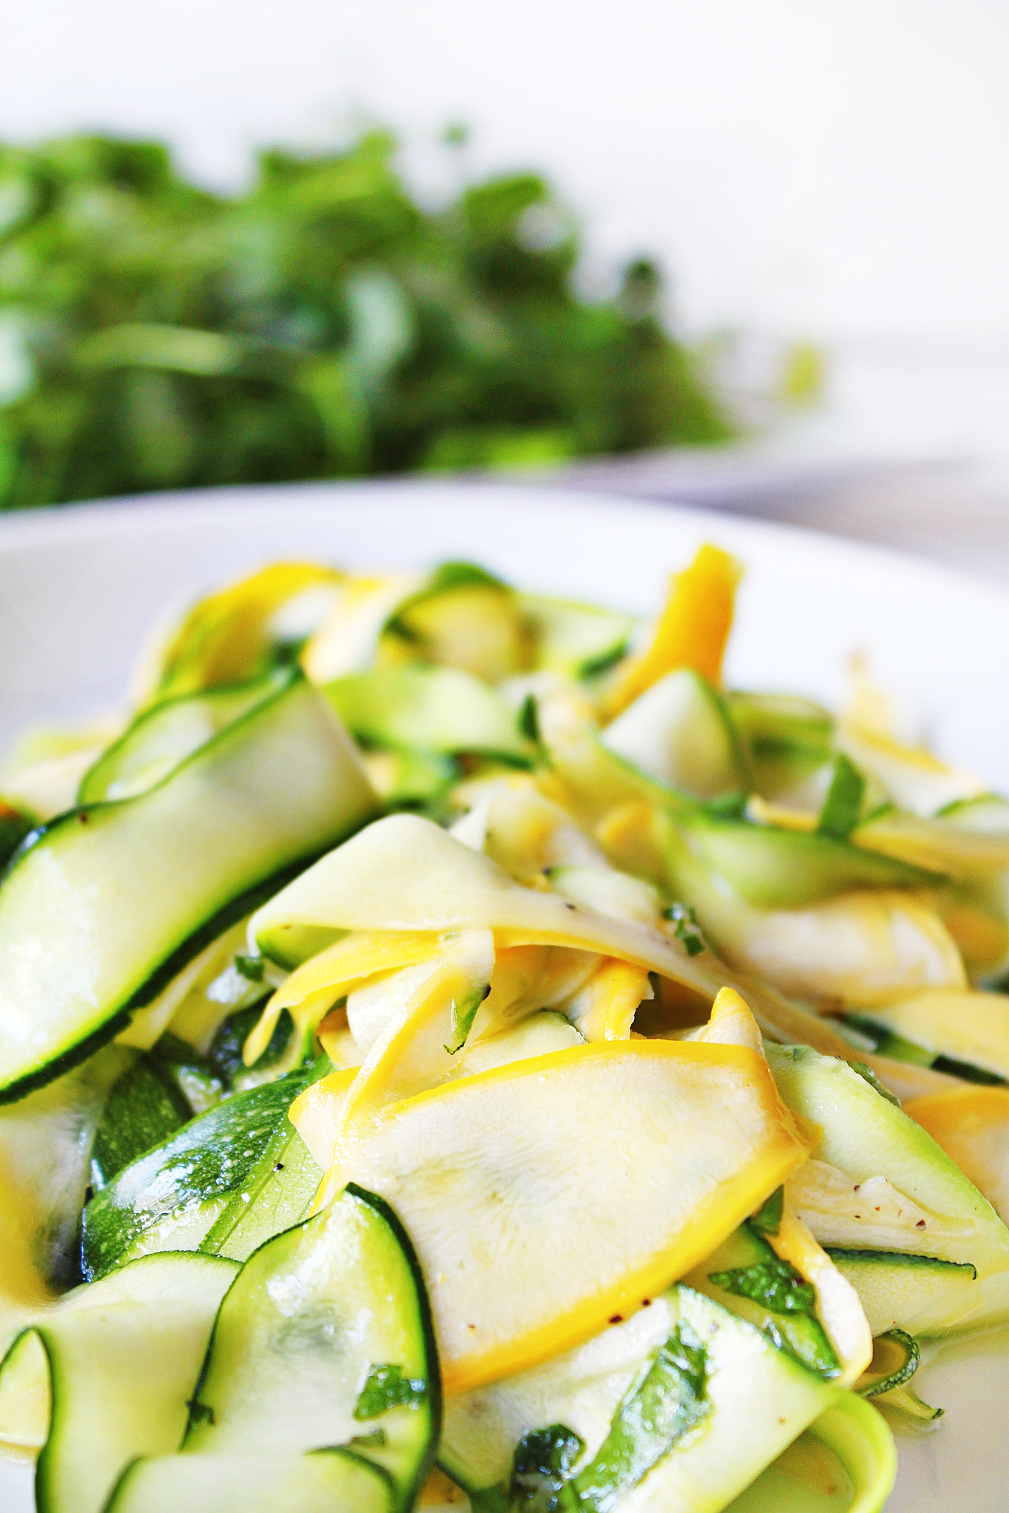 shot of zucchini or courgette summer fresh salad